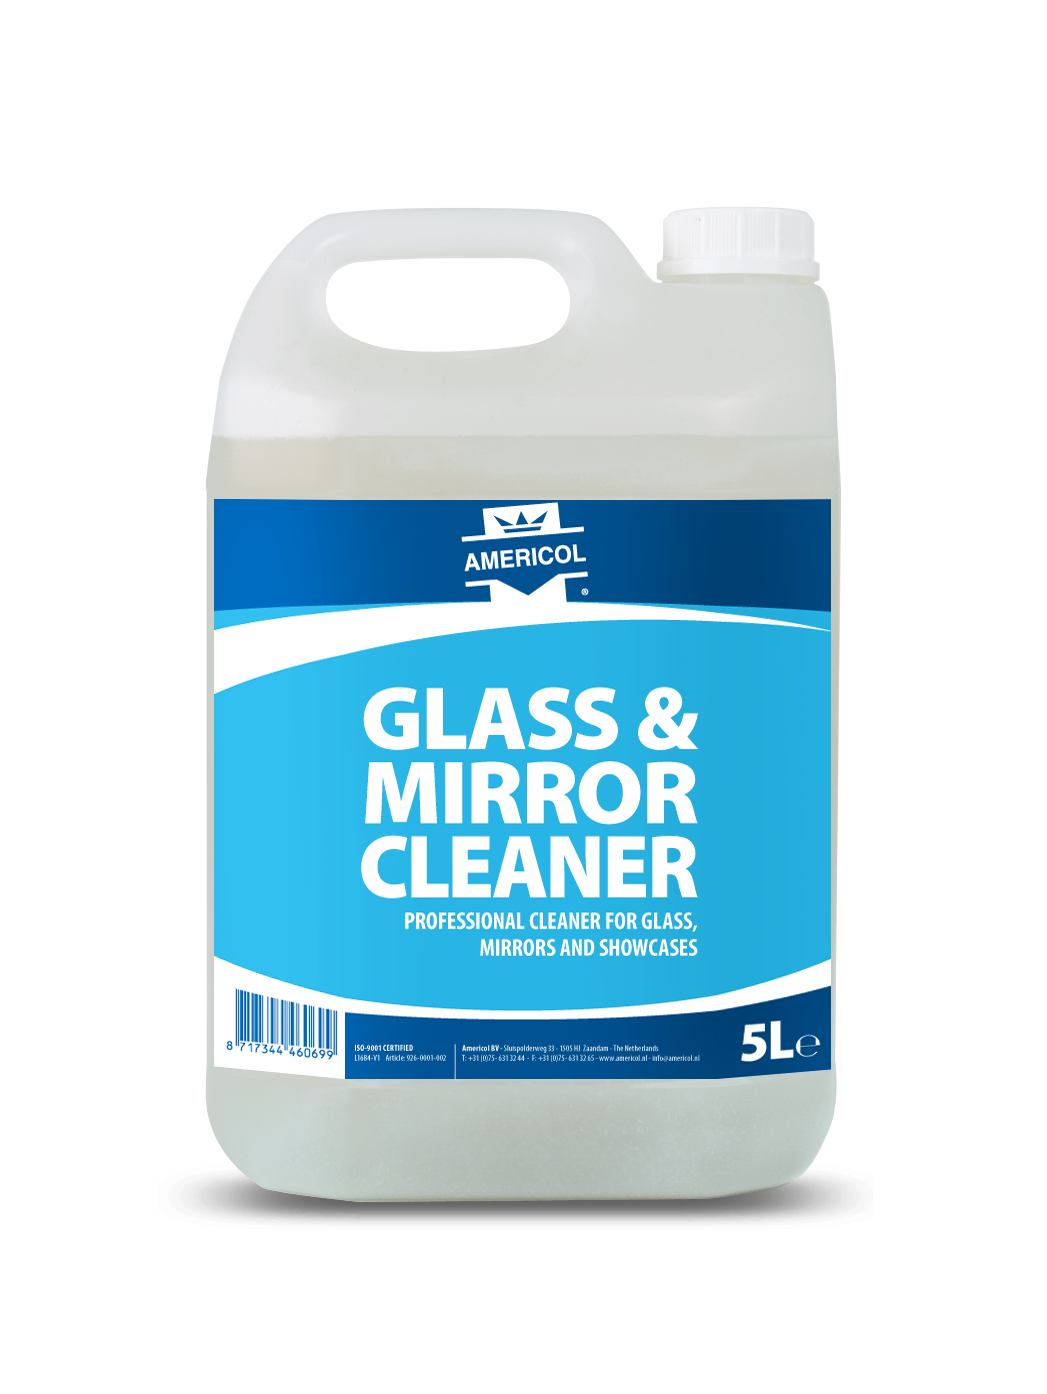 GLASS G MIOR CLEANER